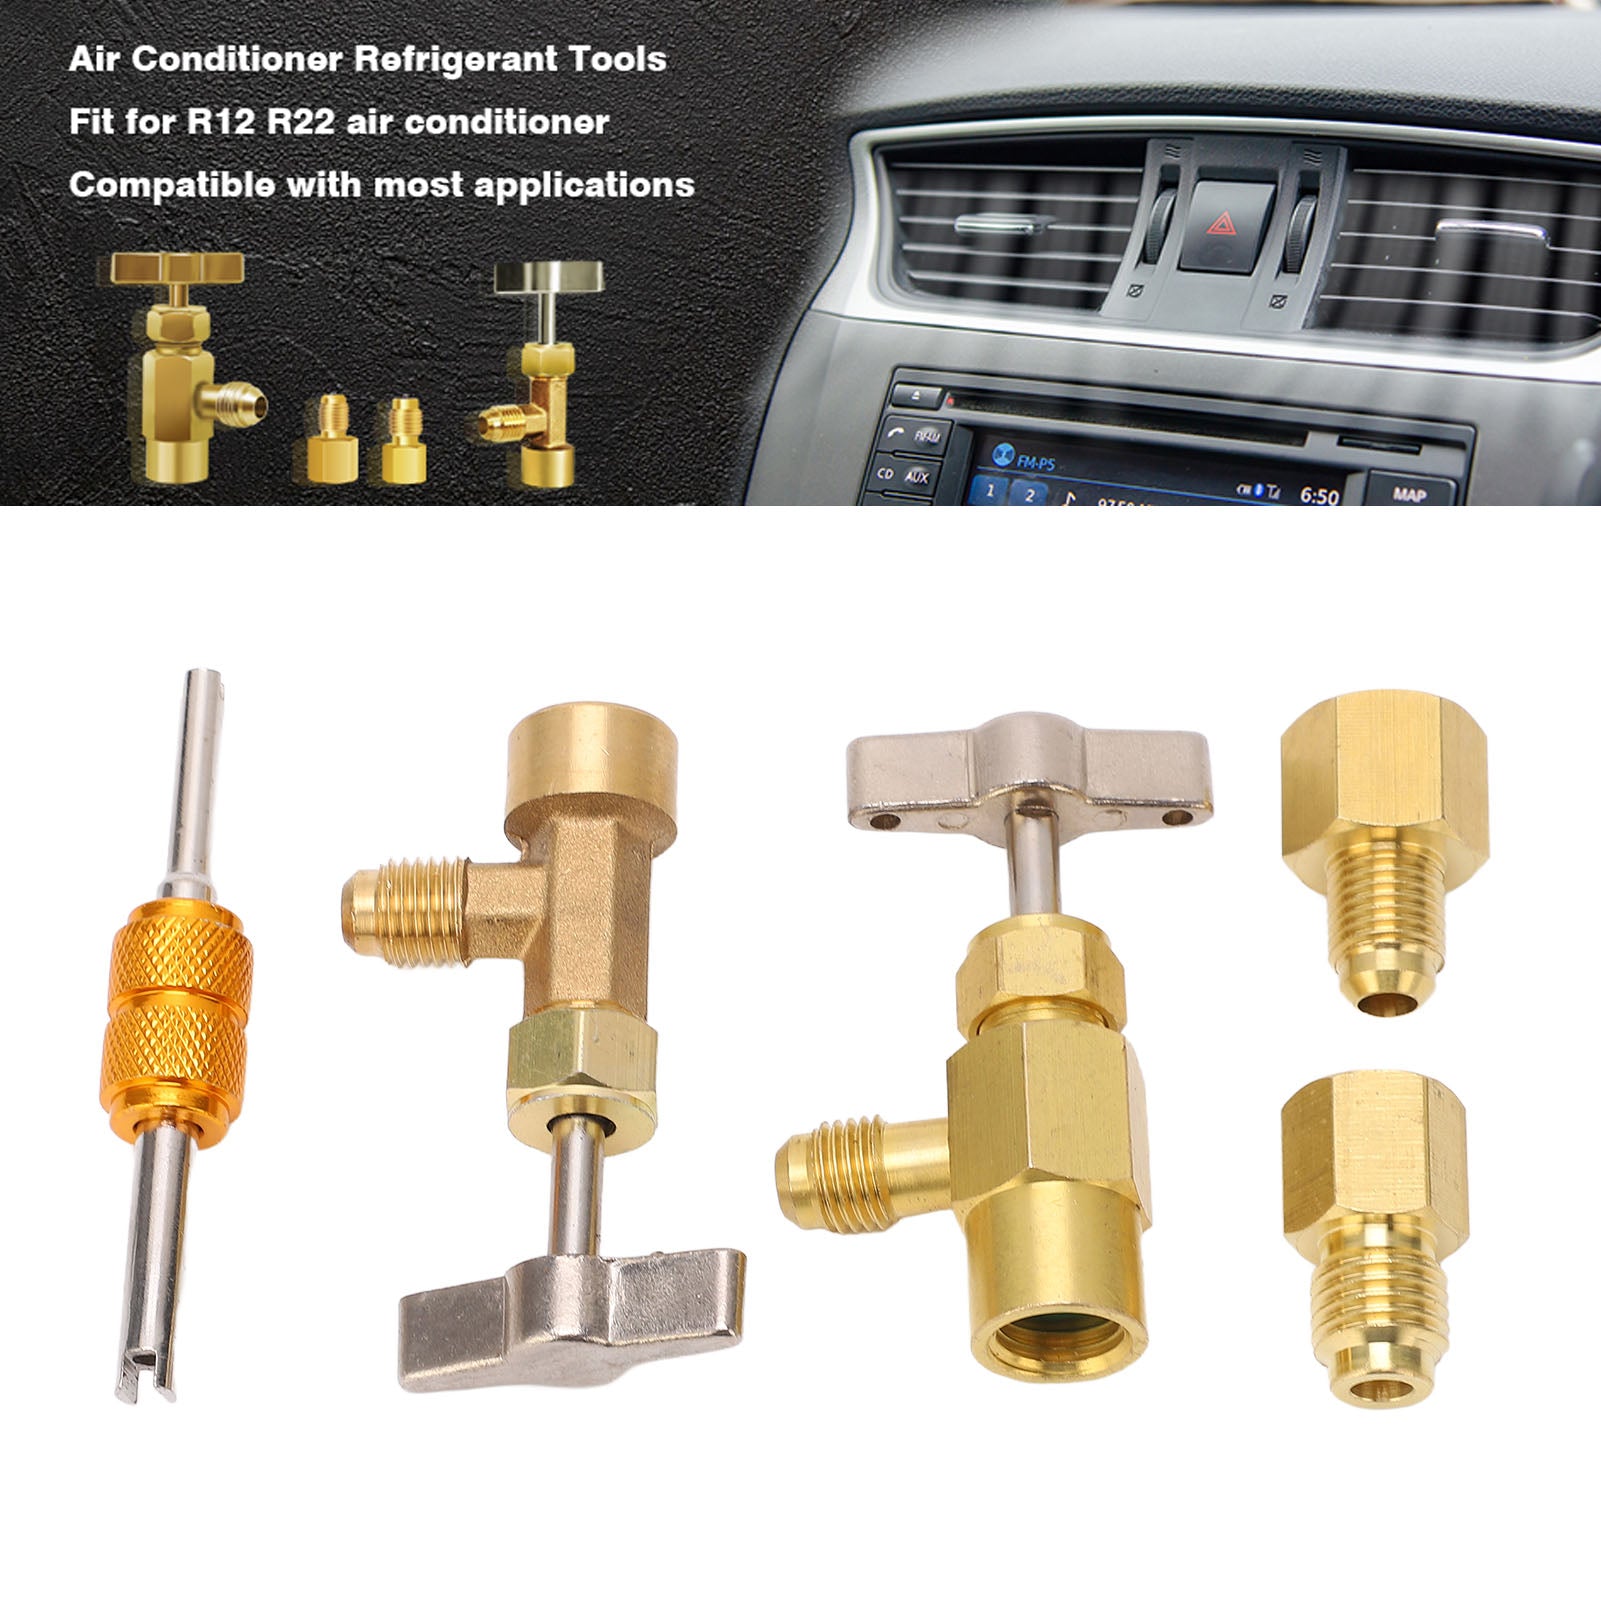 R134A Self Sealing Can Tap Valve Brass Puncture Style Dispenser Valve with Refrigerant Tank Adapters for Air Condition